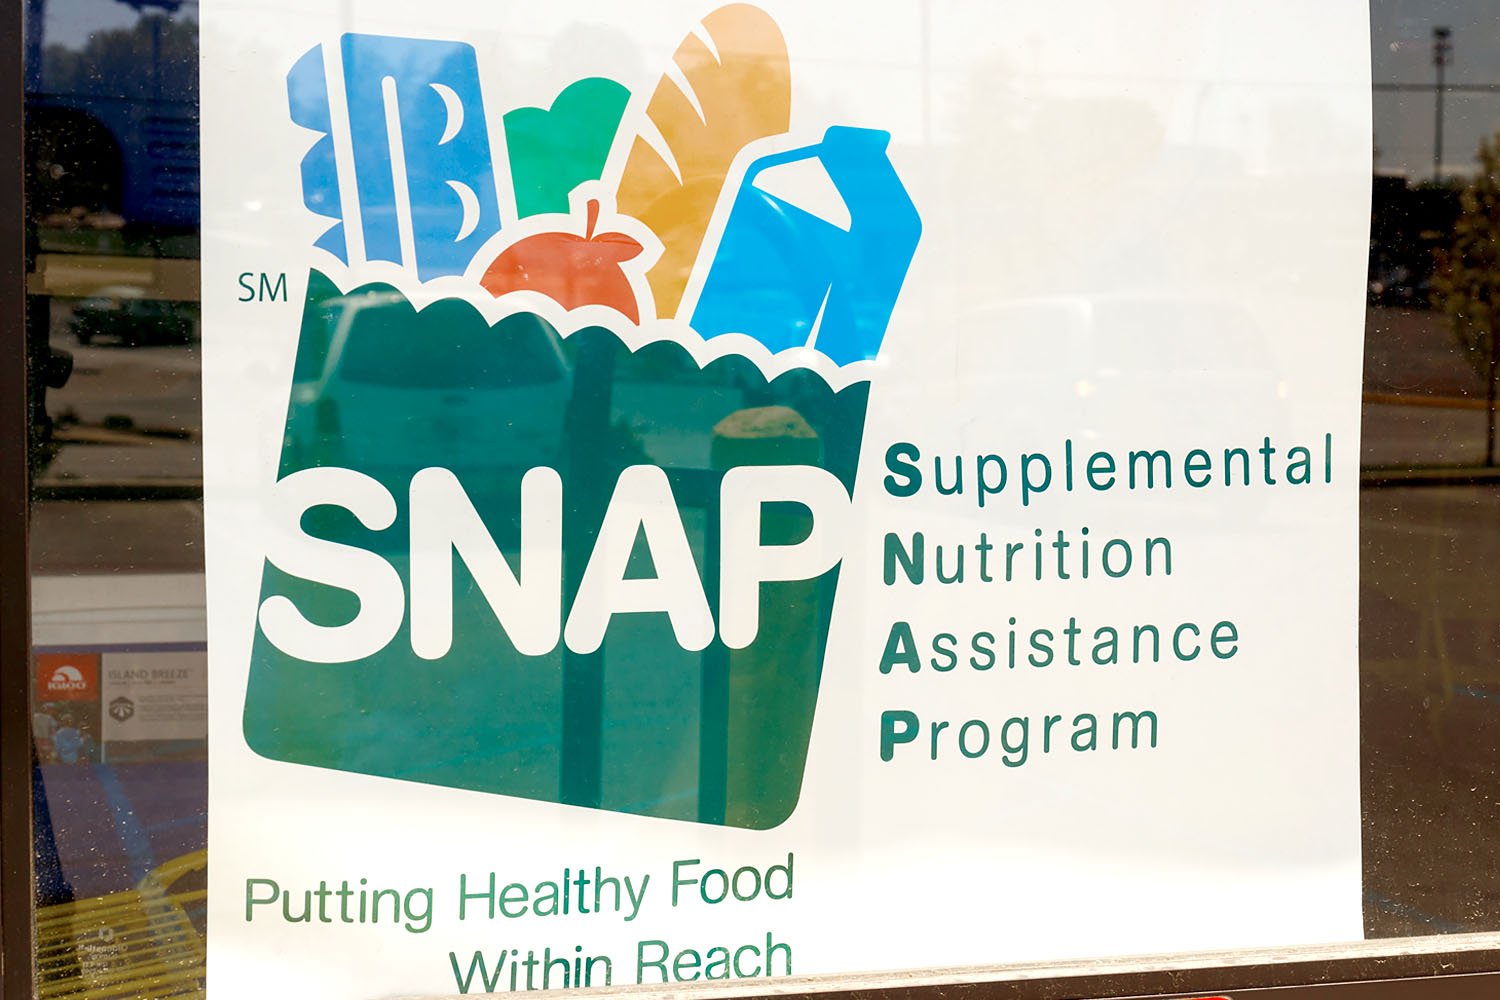 Automatic food stamps worth at least $95 are available for ...